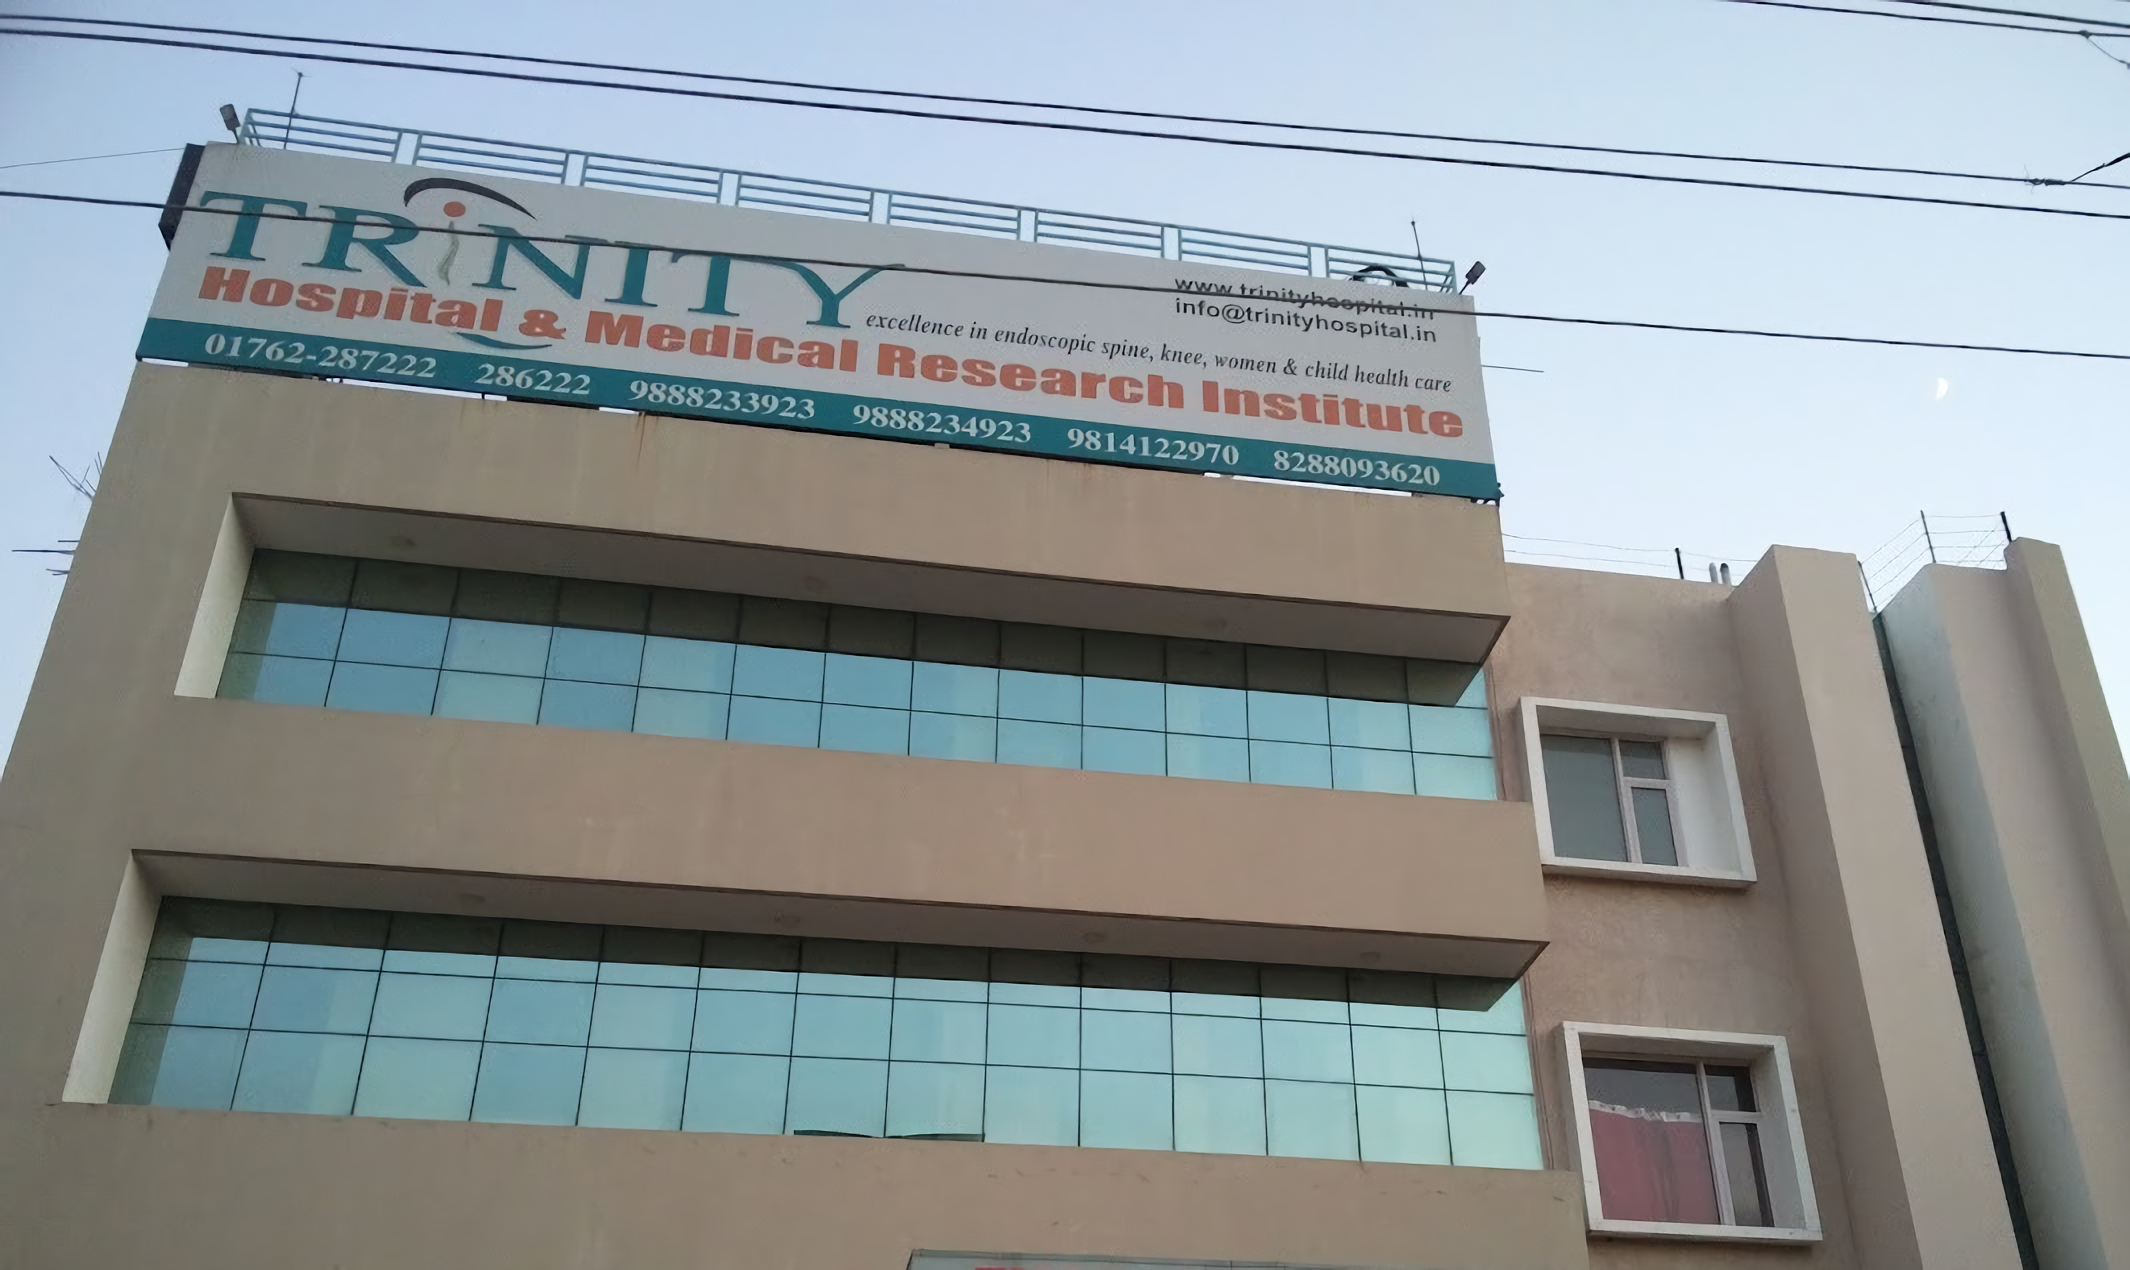 Trinity Hospital And Medical Research Institute